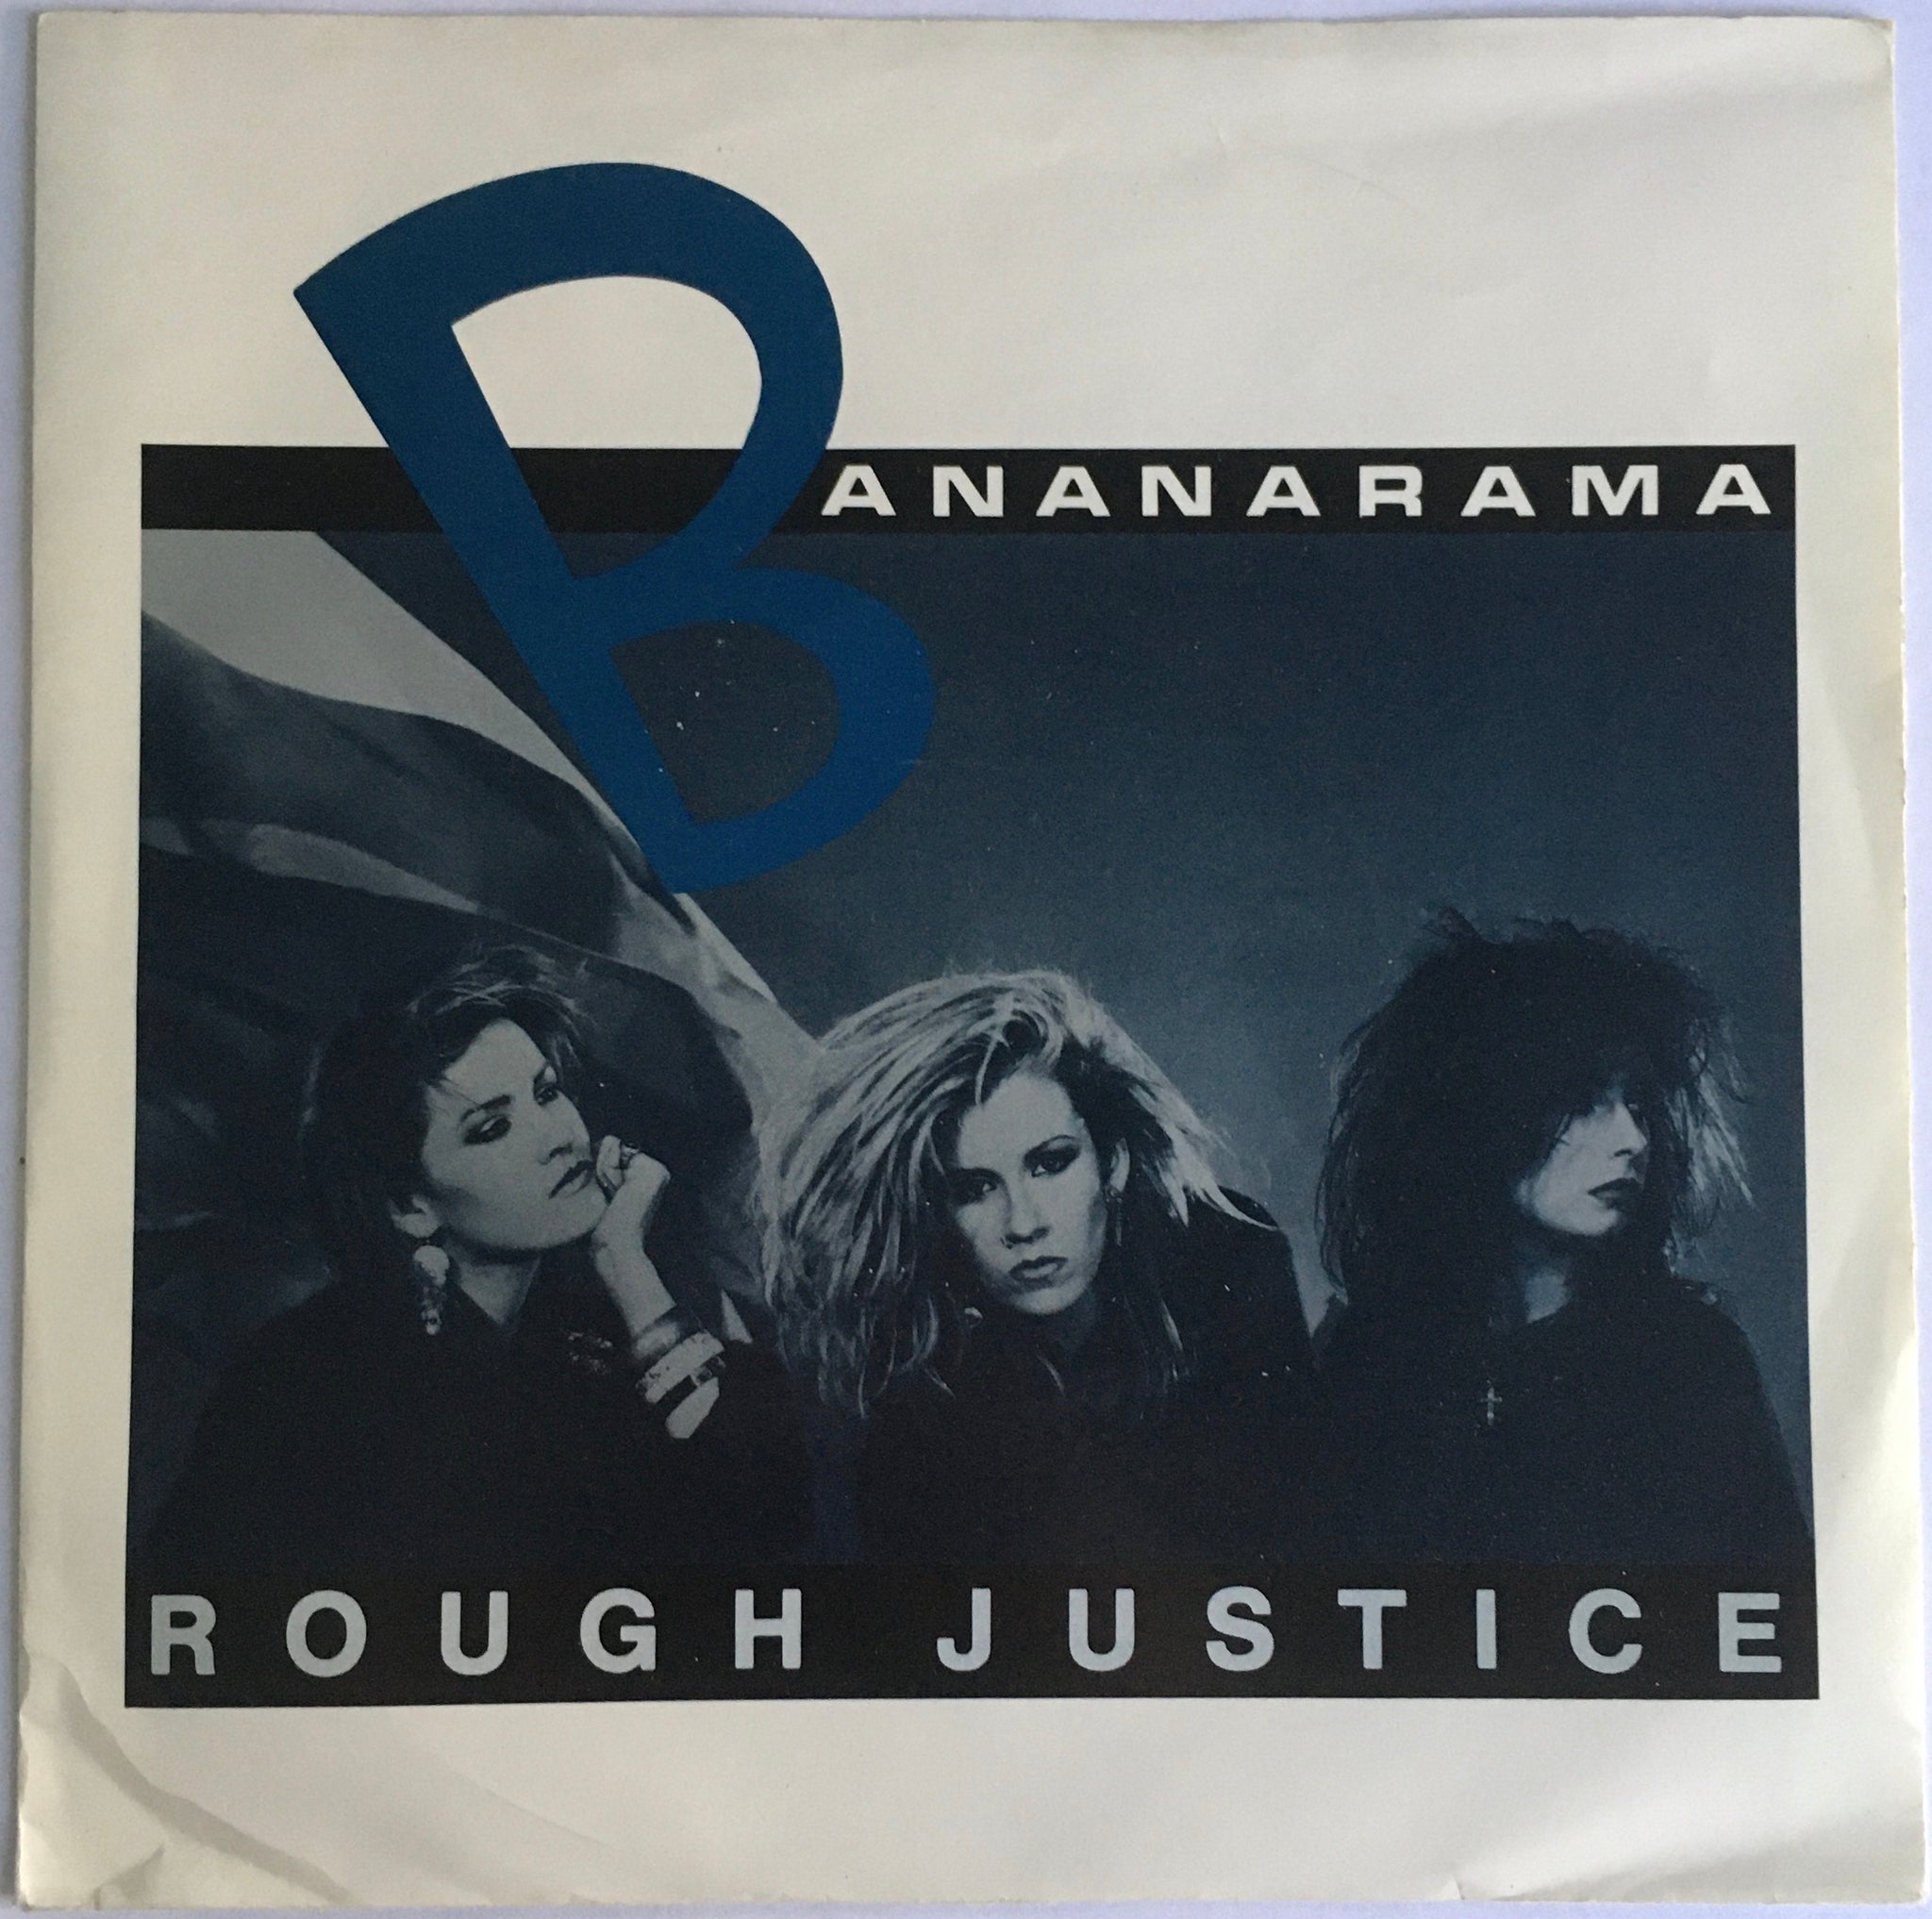 Bananarama, "Rough Justice" Single (1984). Front cover image. Pop, rock, synth-pop.